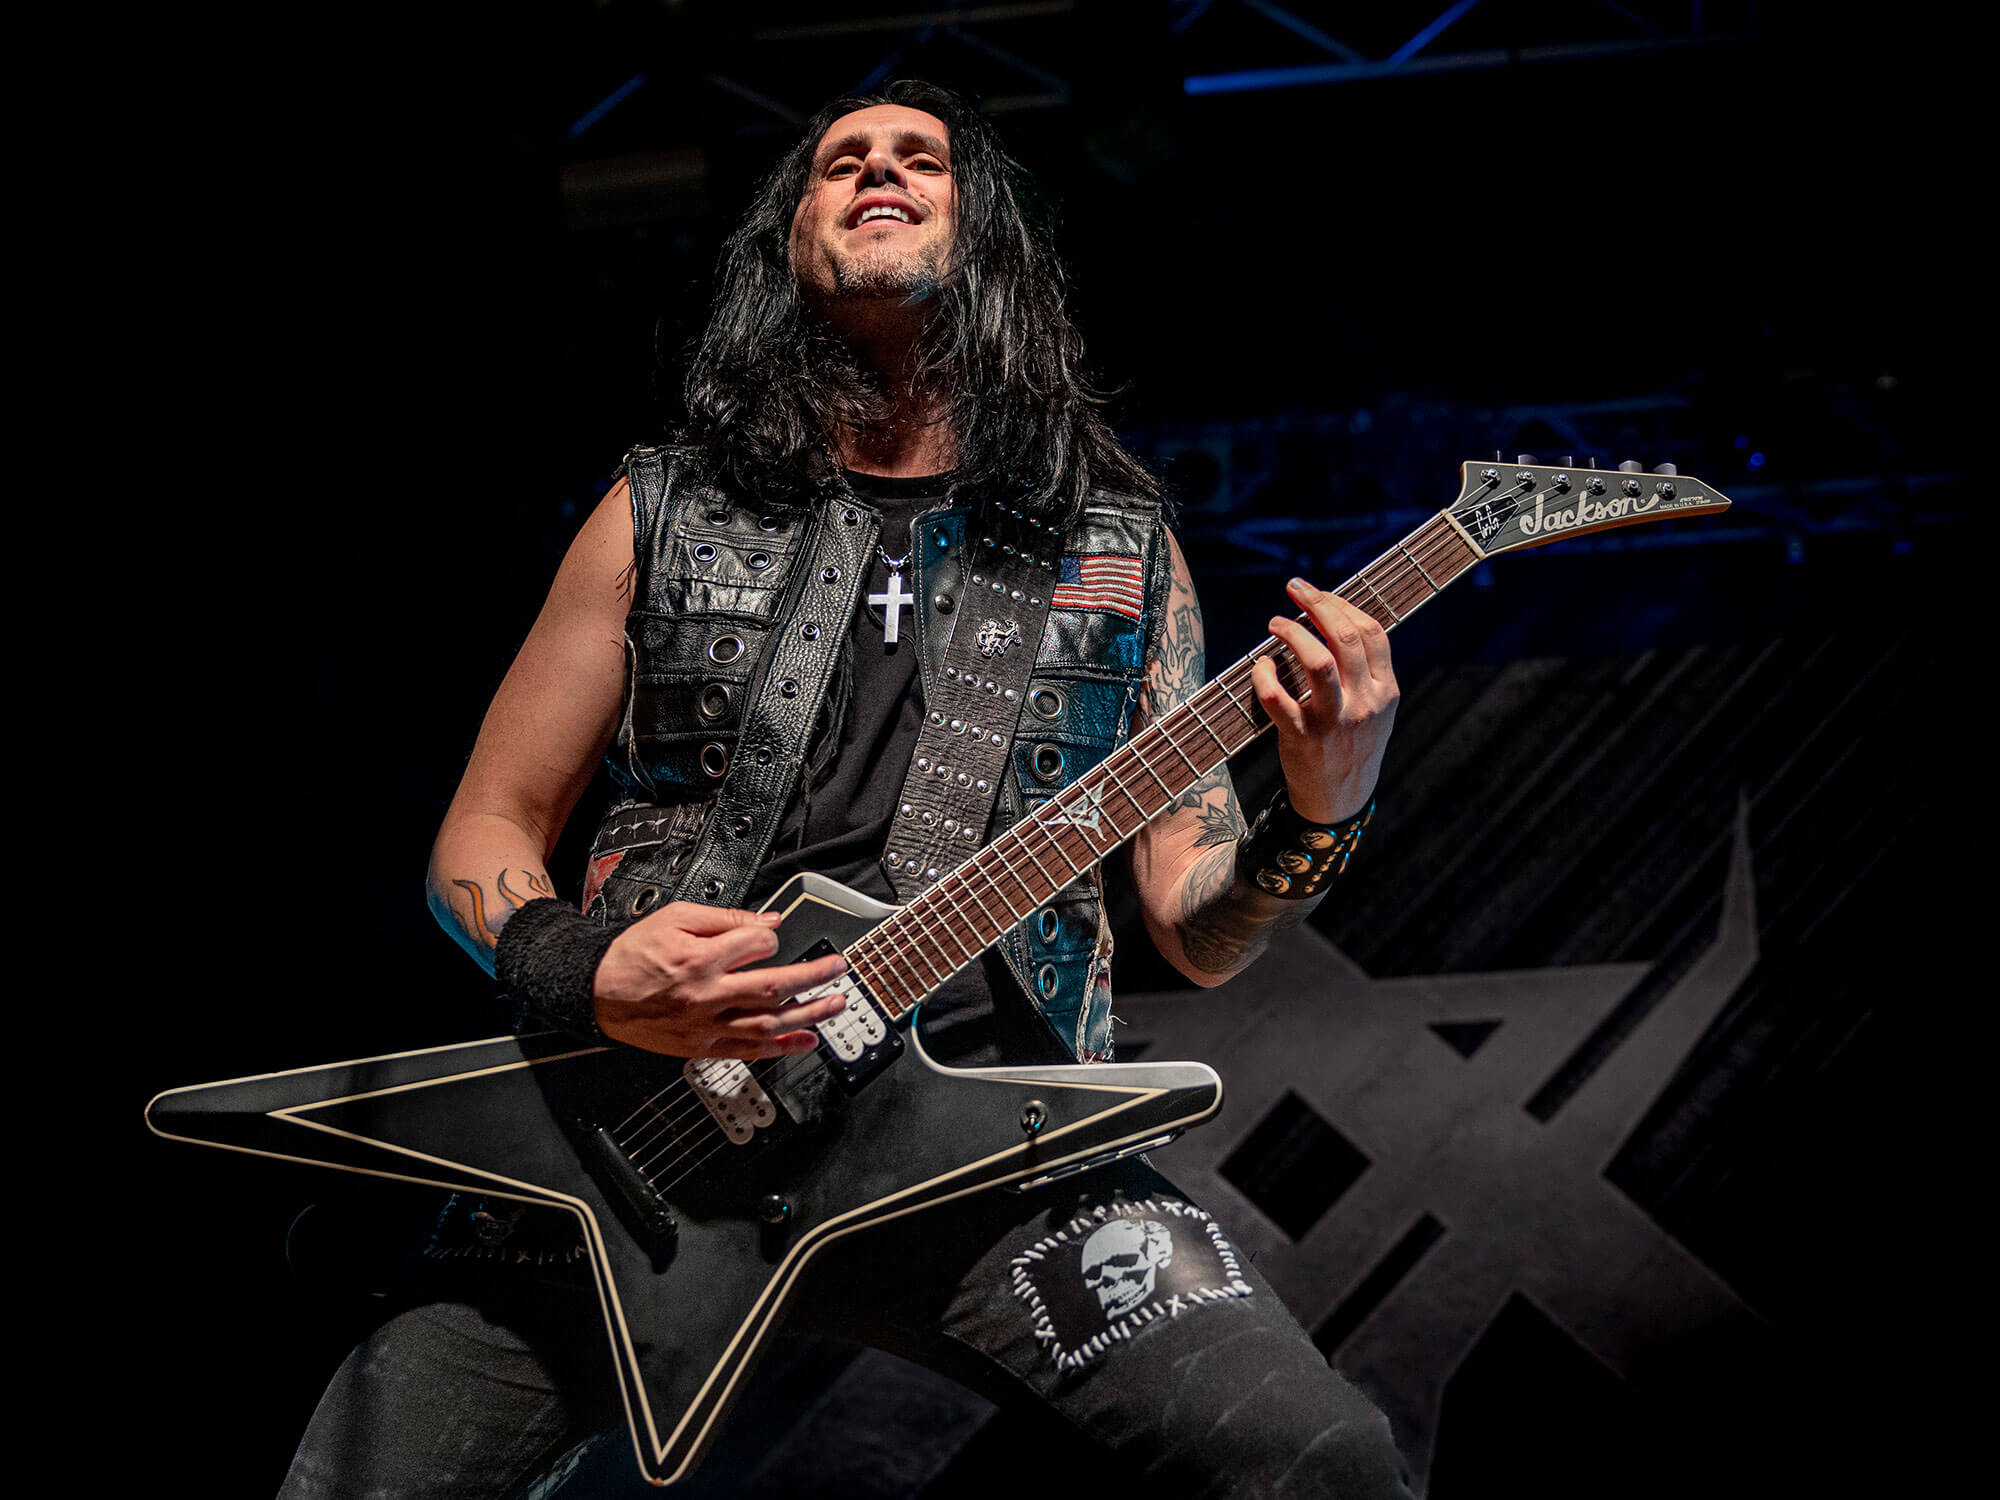 Gus G performing live